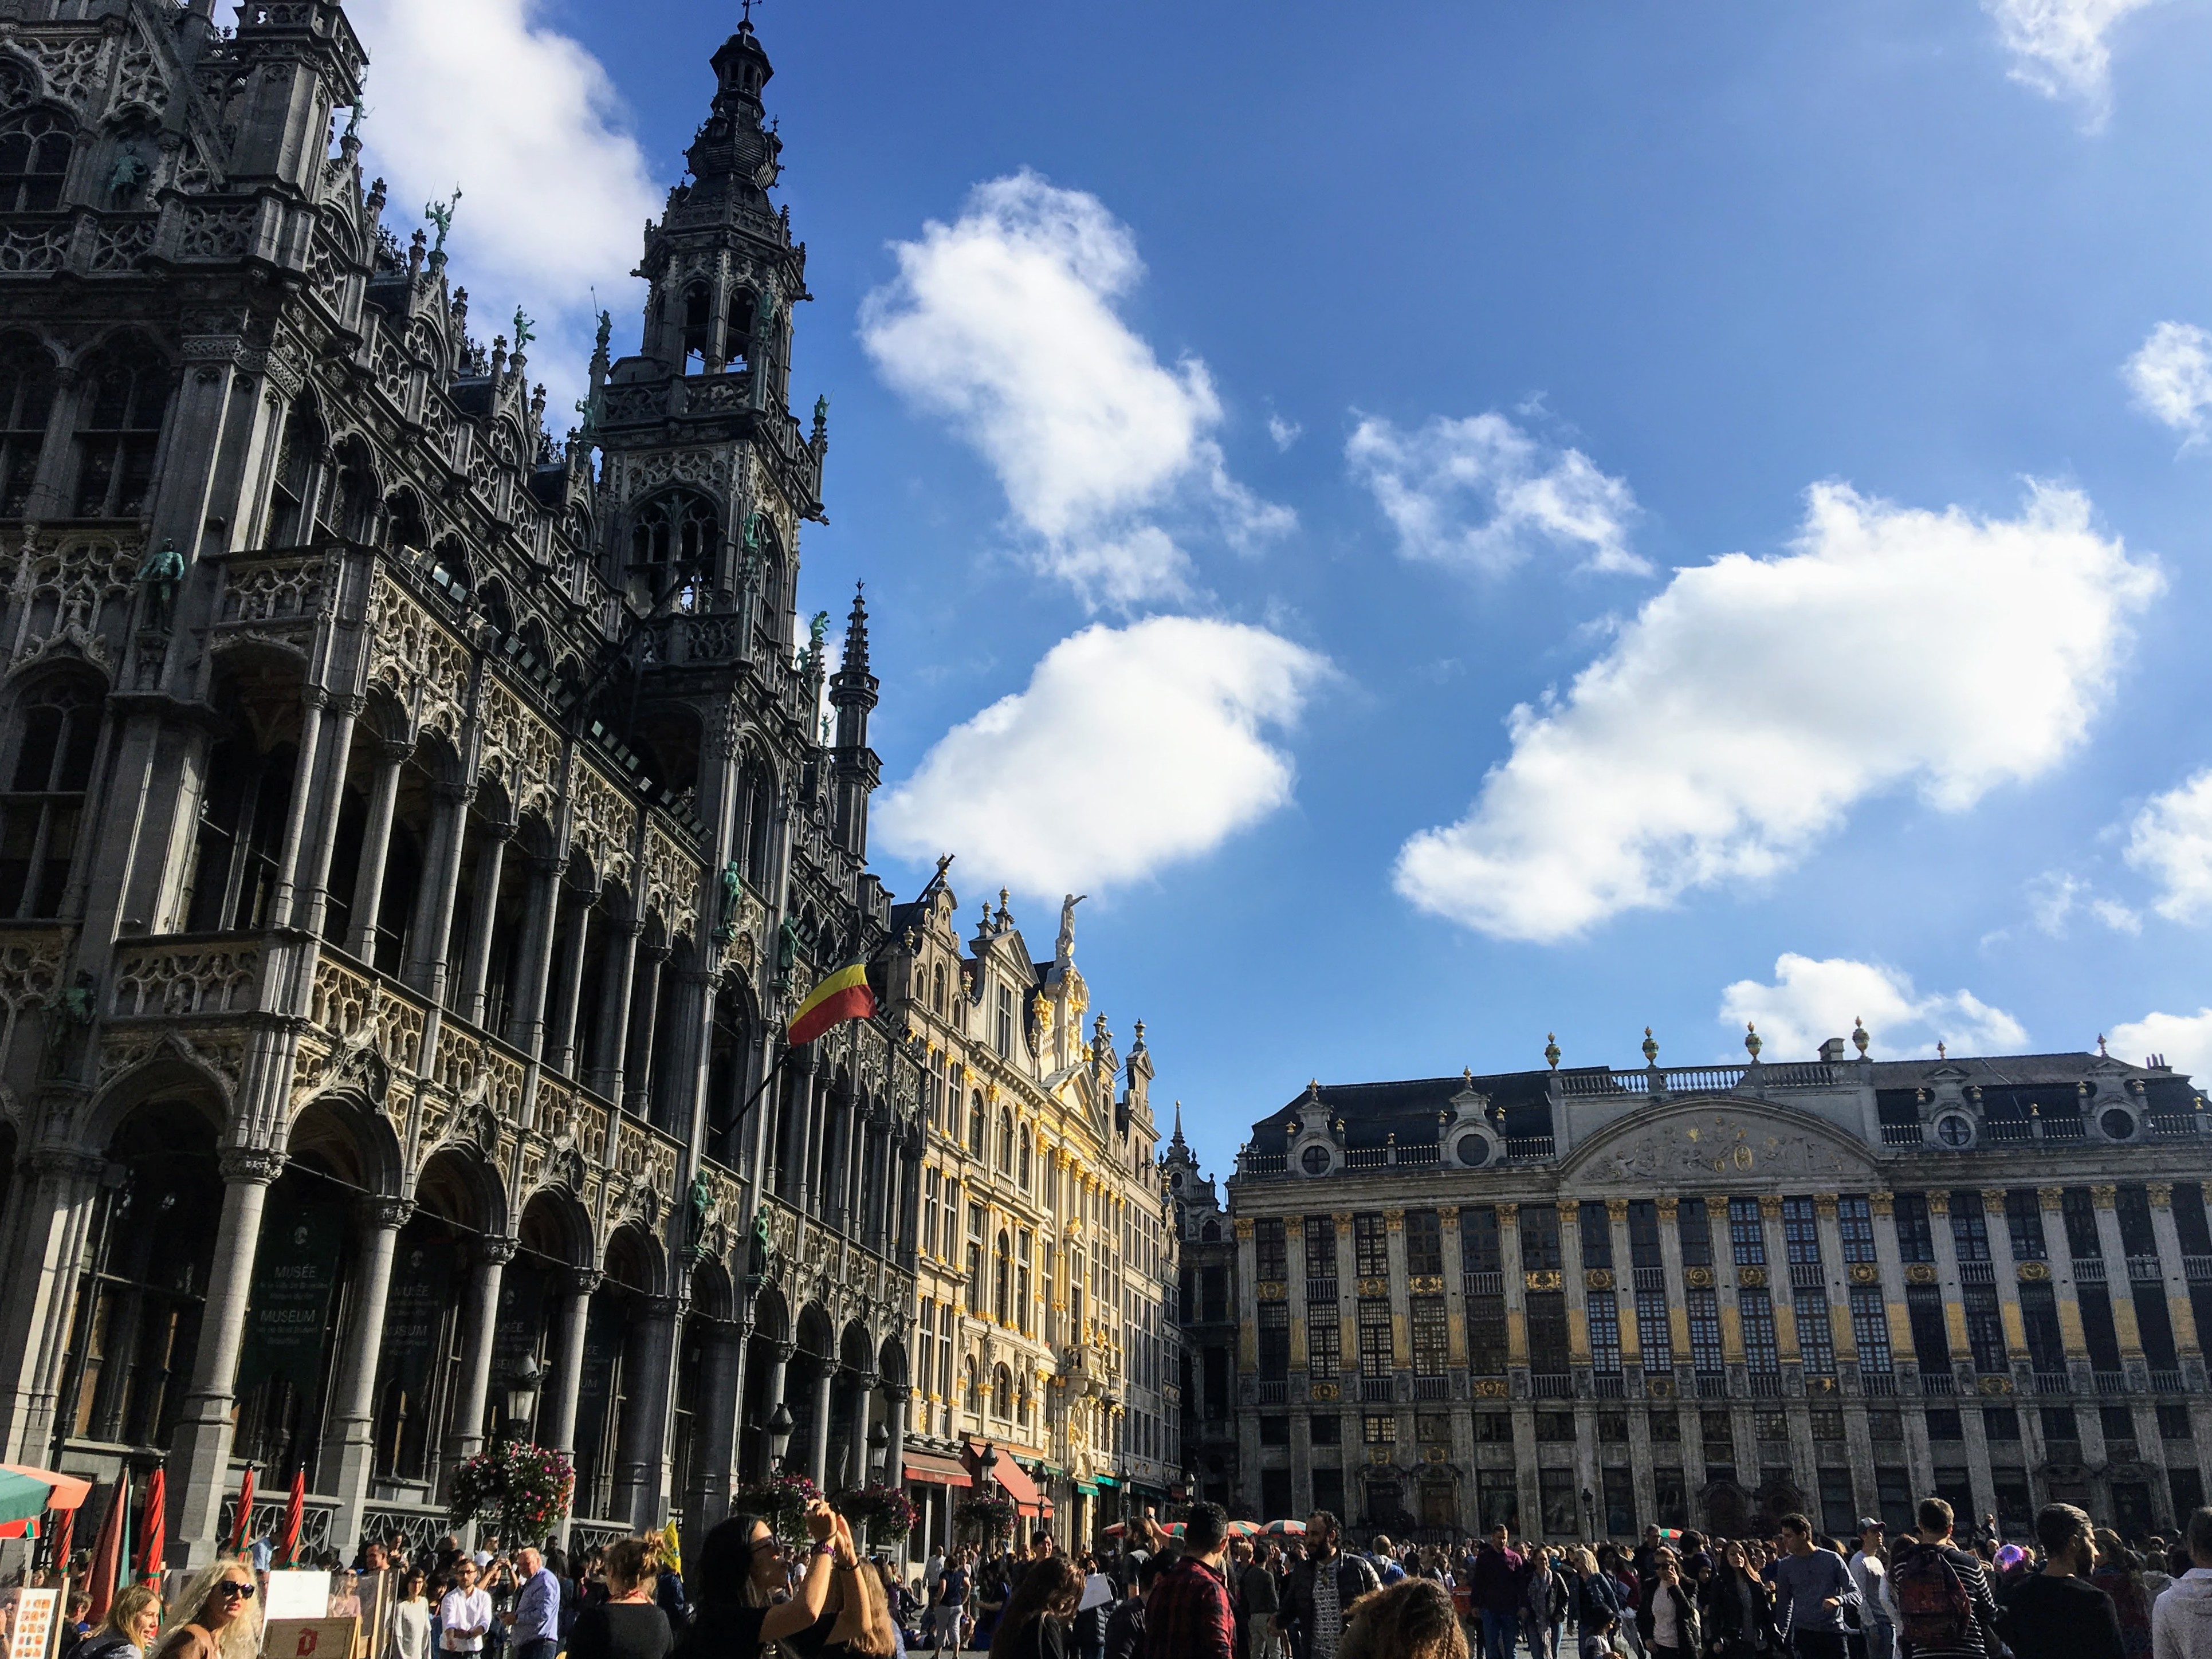 The Grand Place on a sunny day in Brussels, Belgium